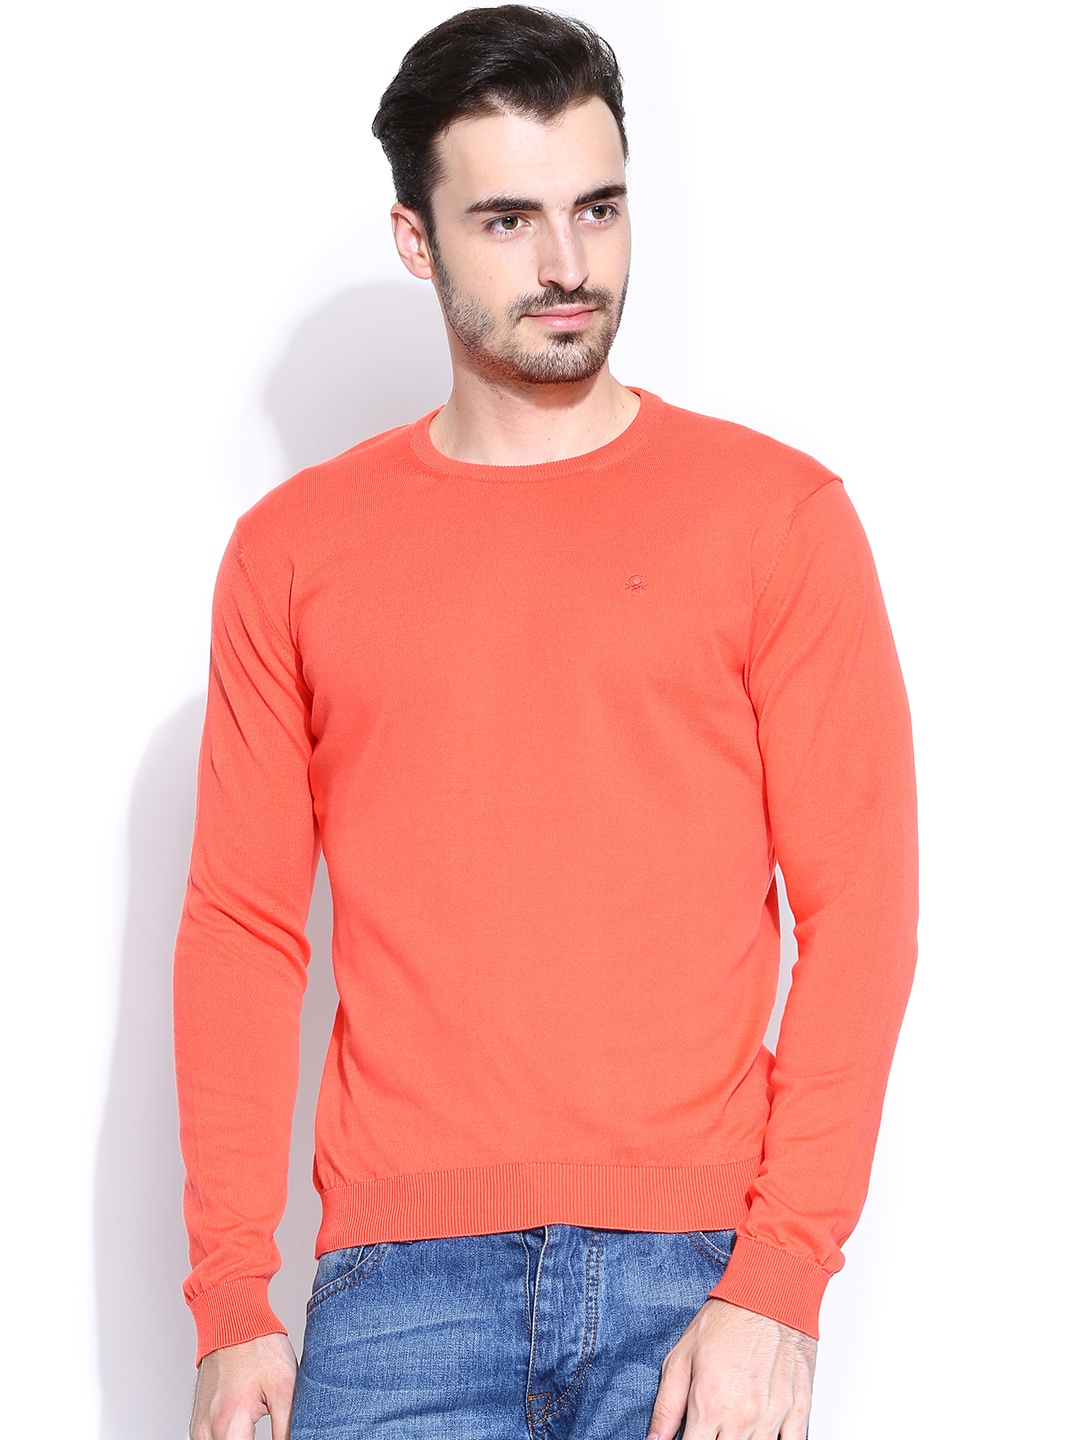 Home Clothing Men Clothing Sweaters United Colors of Benetton Sweaters